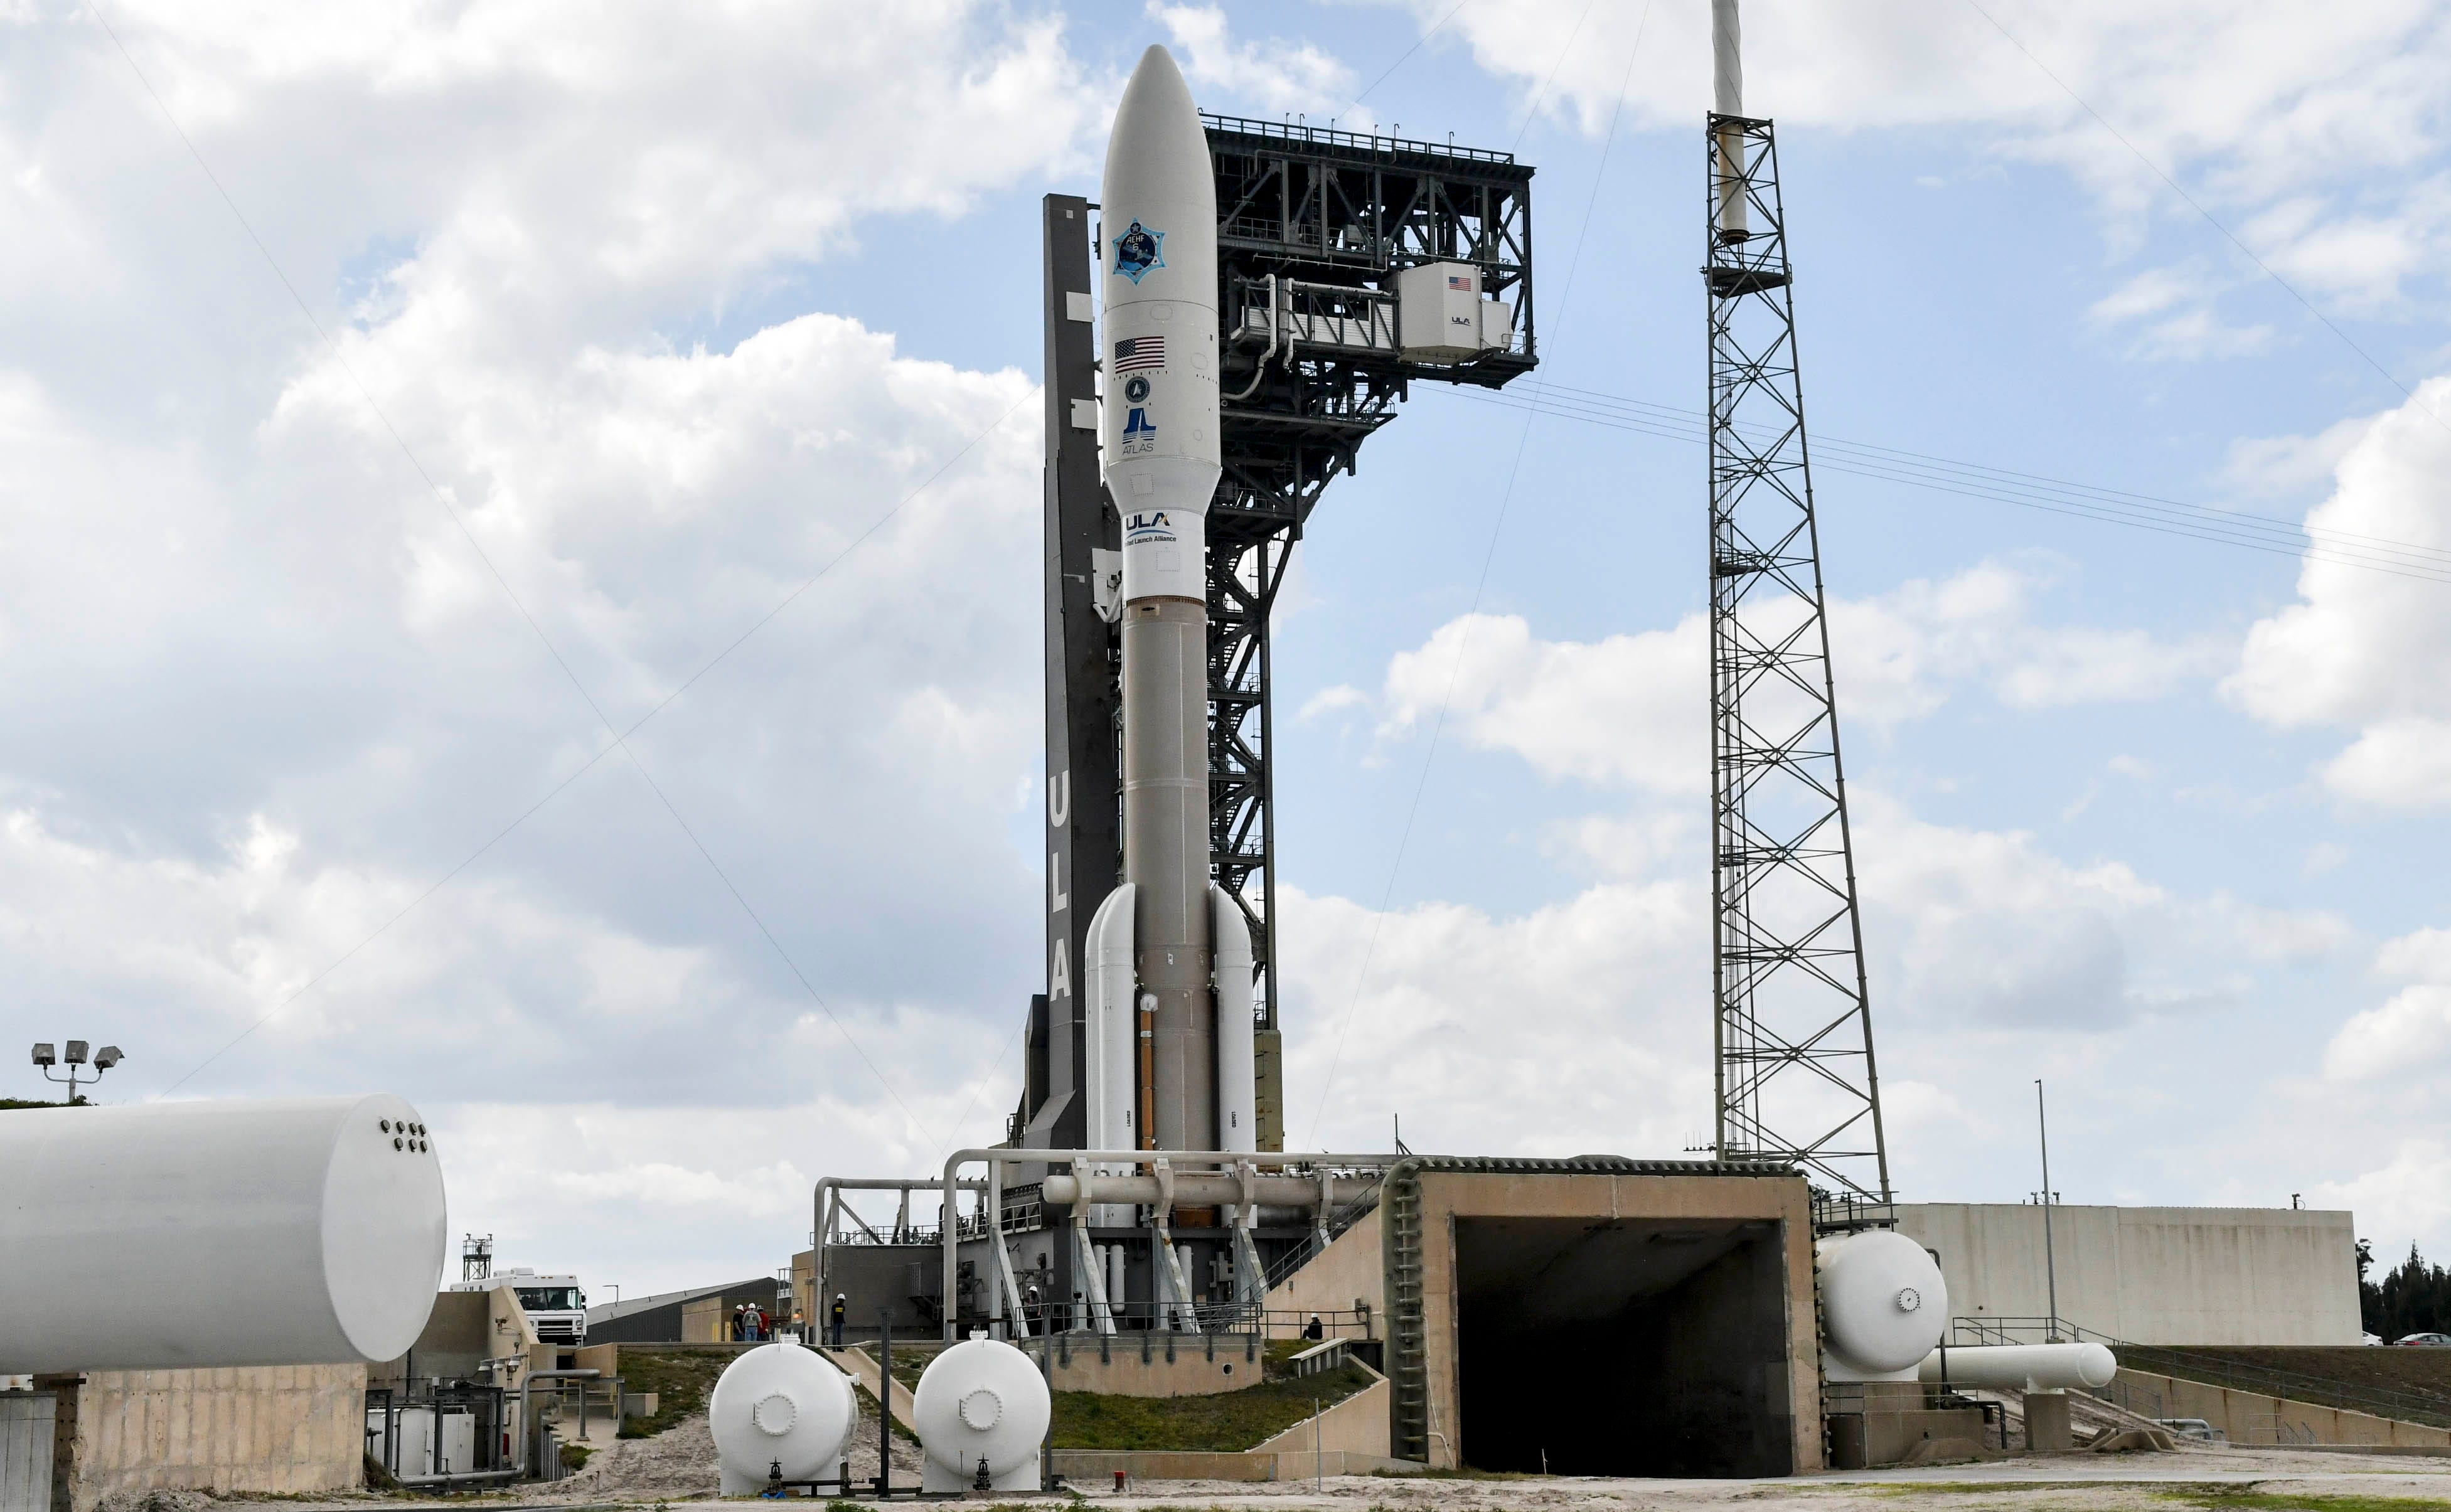 Live: Watch the most powerful Atlas V rocket launch from Cape Canaveral - Florida Today